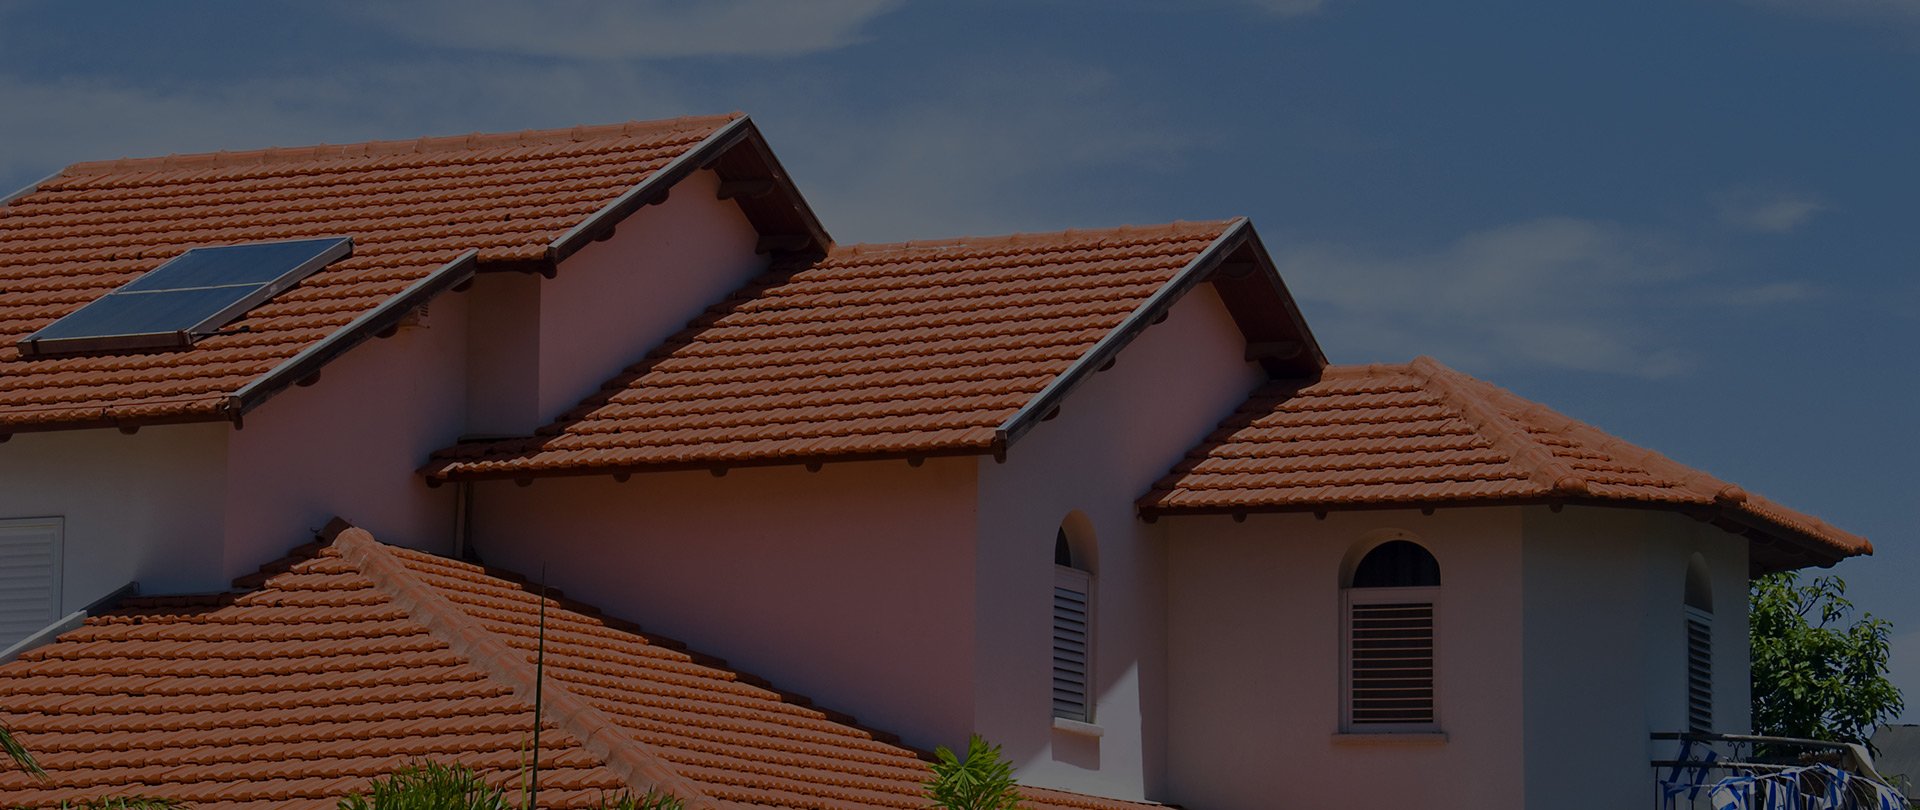 Tile roofing company